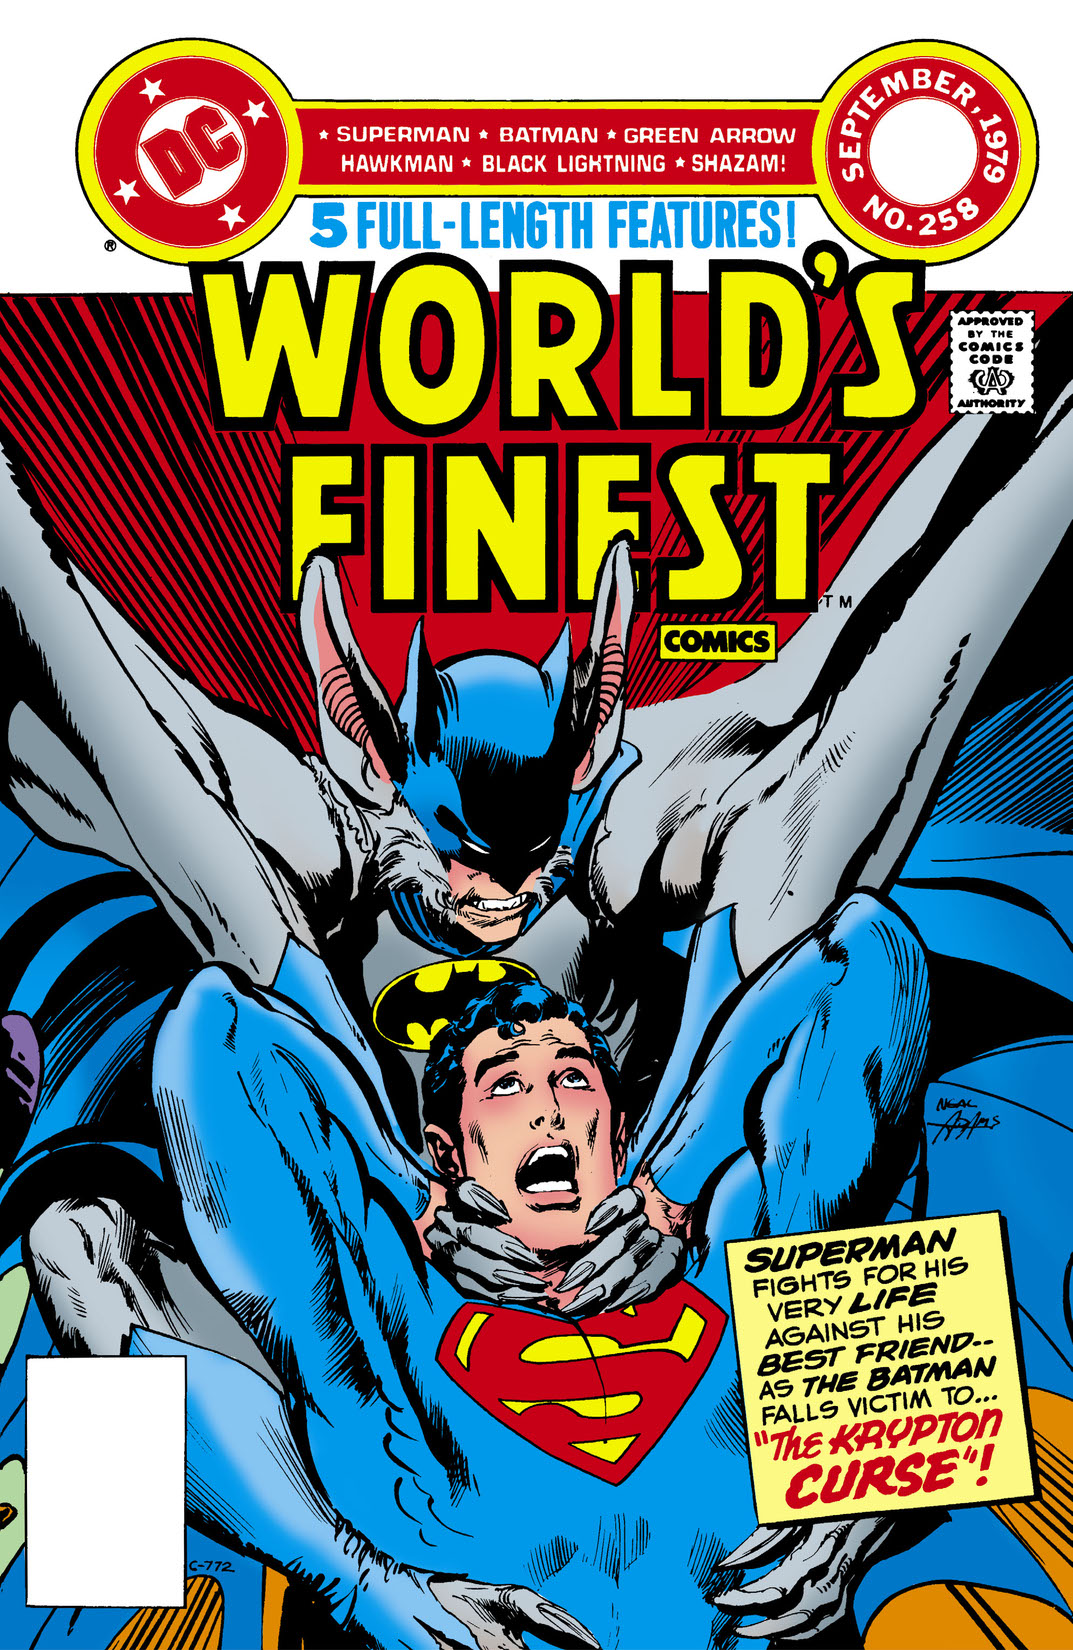 World's Finest Comics (1941-) #258 preview images